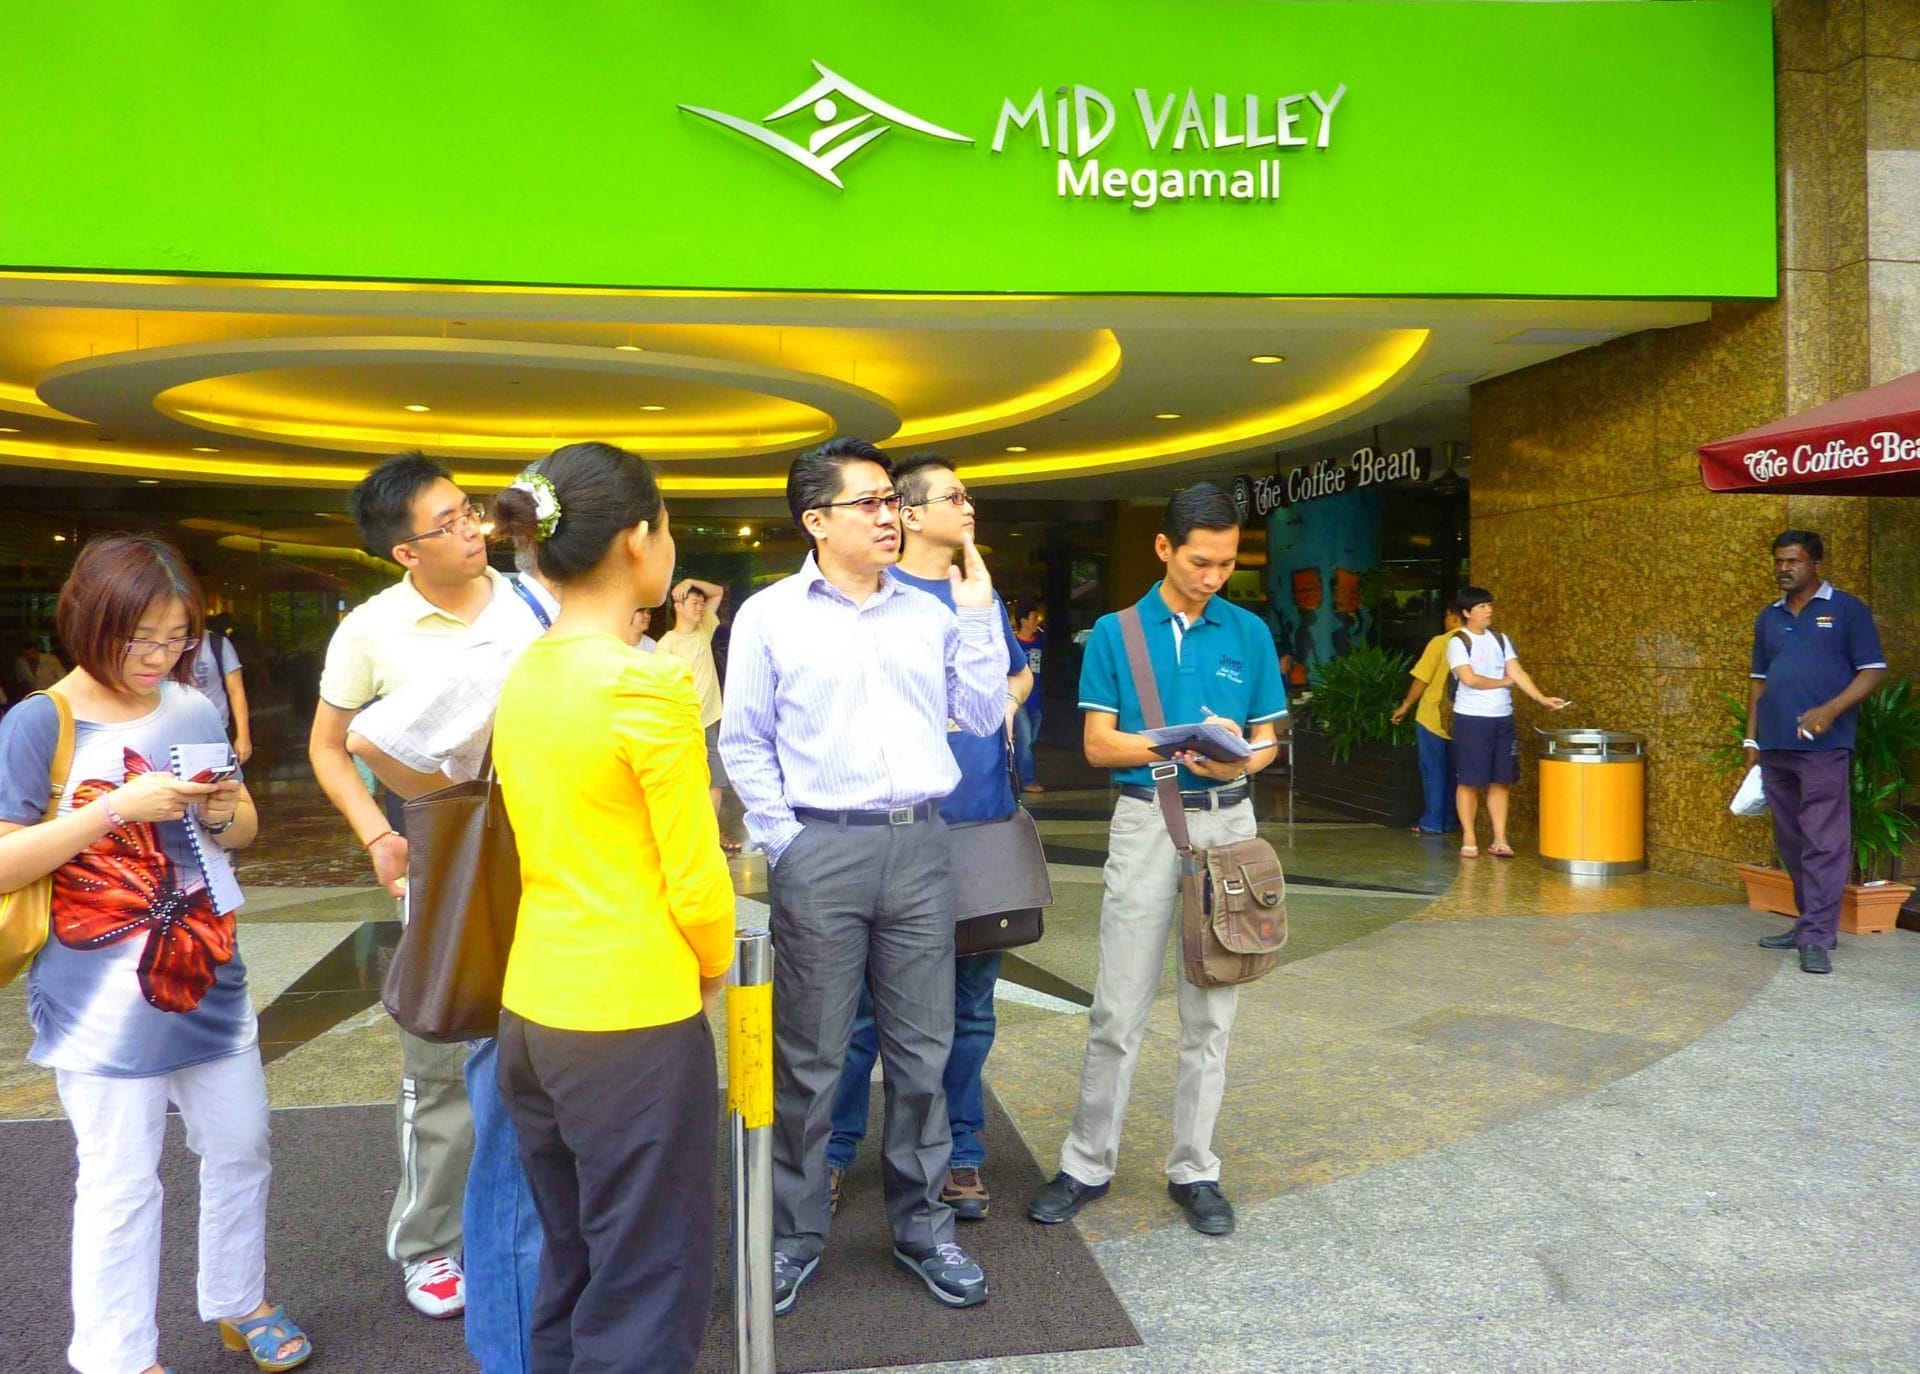 Mid Valley is one of our visiting site for megamall commercial feng shui case study. The Auspiciousness of the biggest and most crowded megamall in Malaysia is due to external land formation, rivers, traffic and internal feng shui.We have discussed in detail about the feng shui significant at different points at this megamall in term of feng shui. 